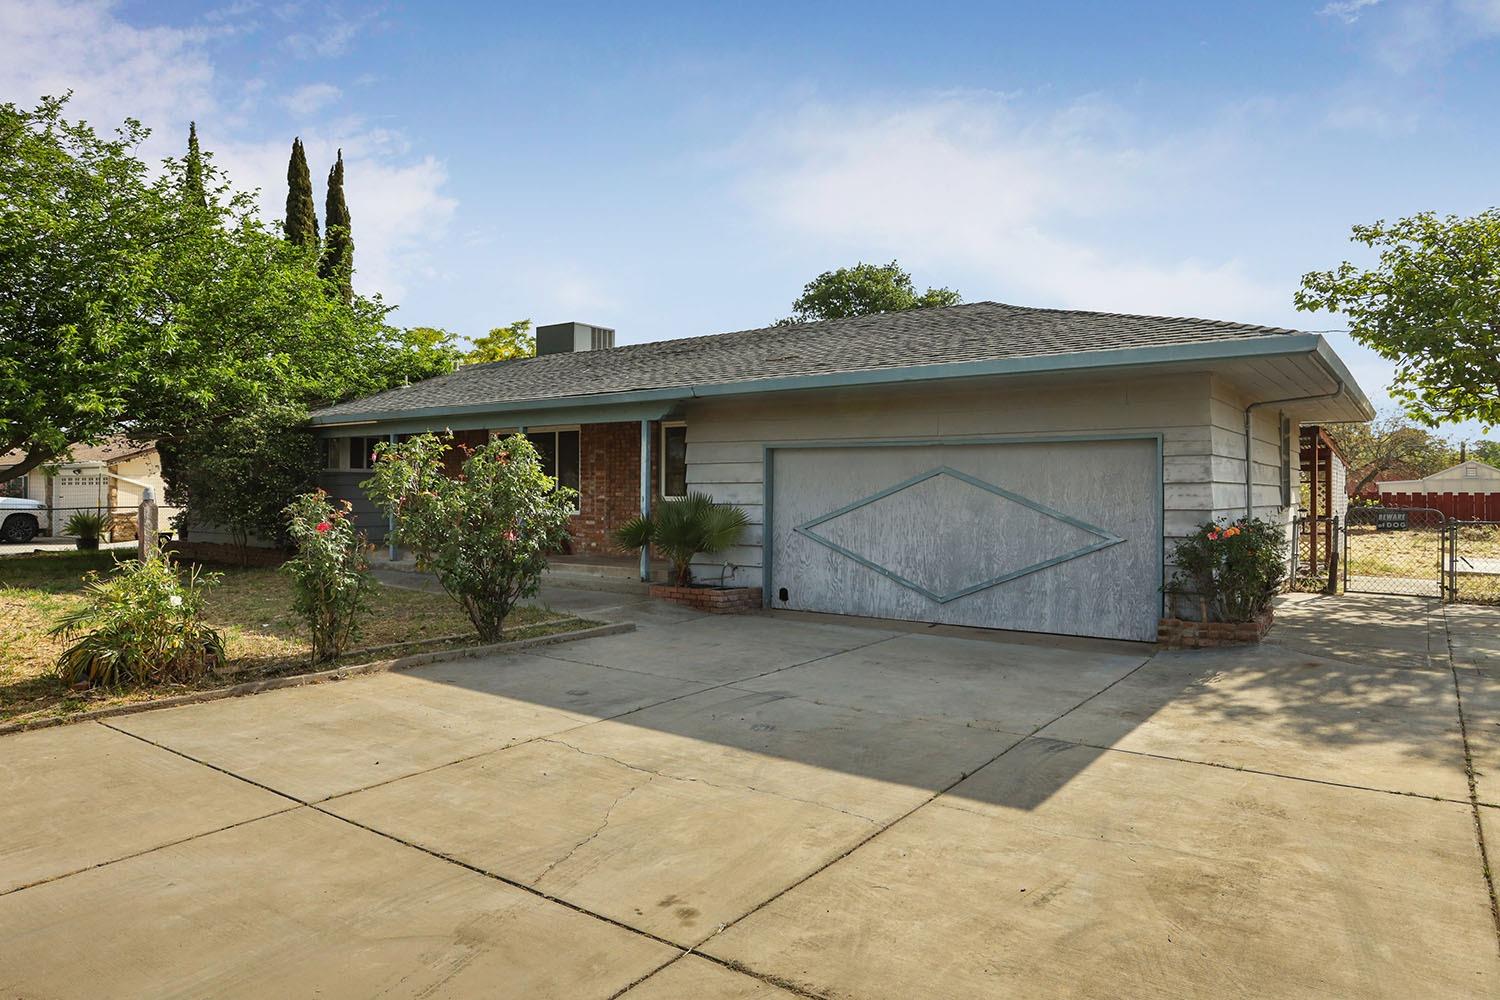 Photo of 25170 N Eunice Ave in Acampo, CA